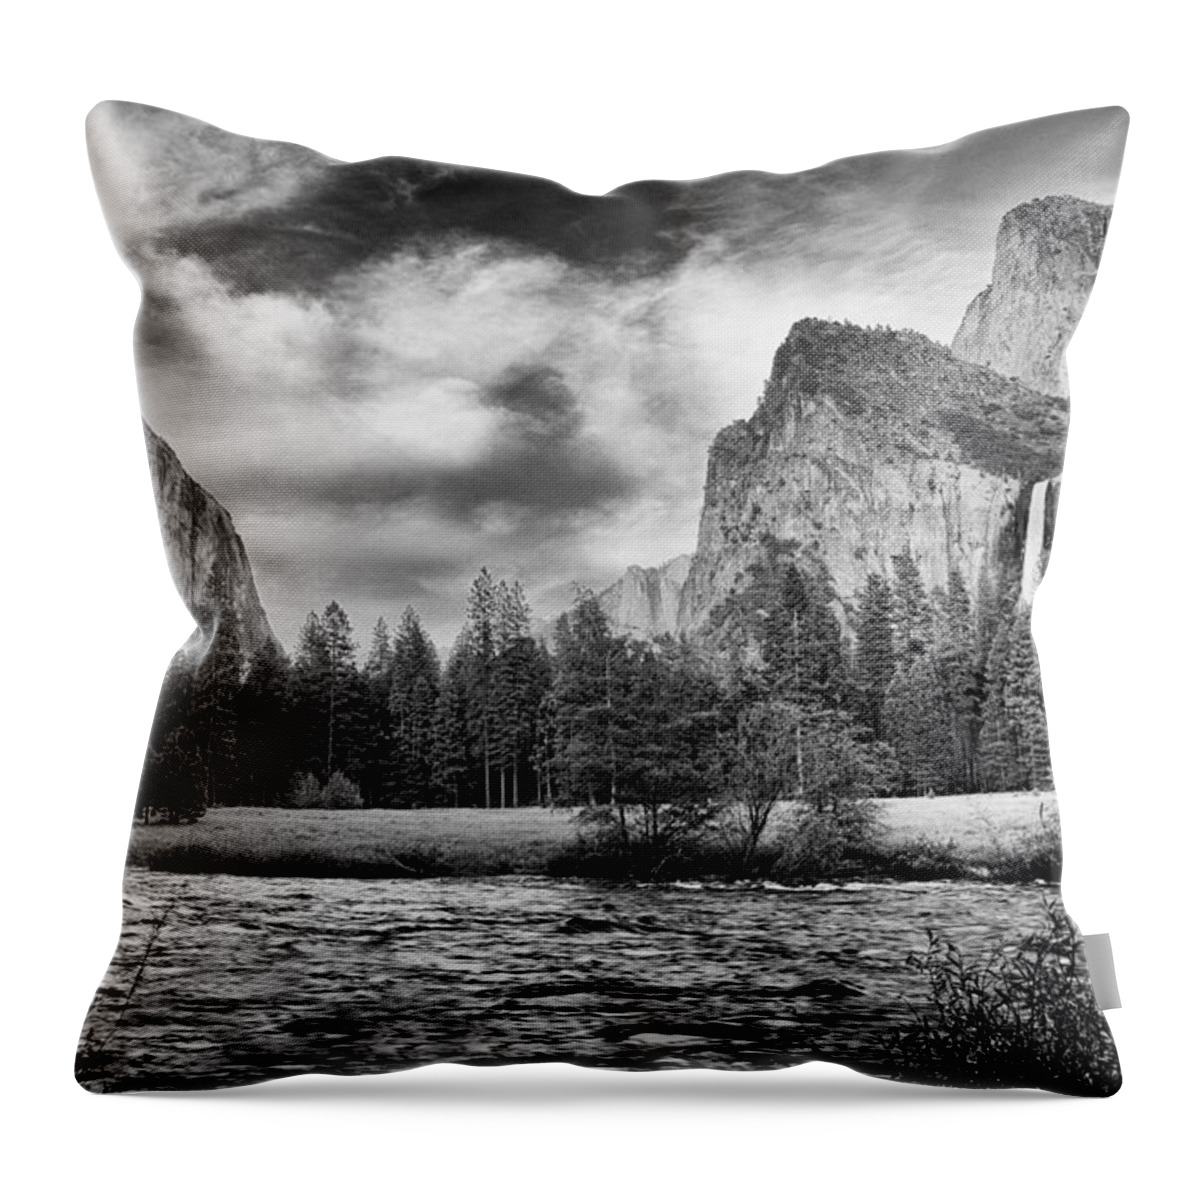 Cloudy Day River Water Trees Forest Waterfall Sky Yosemite National Park California Scenic Landscape Nature Black White Granite Throw Pillow featuring the photograph Valley View by Cat Connor